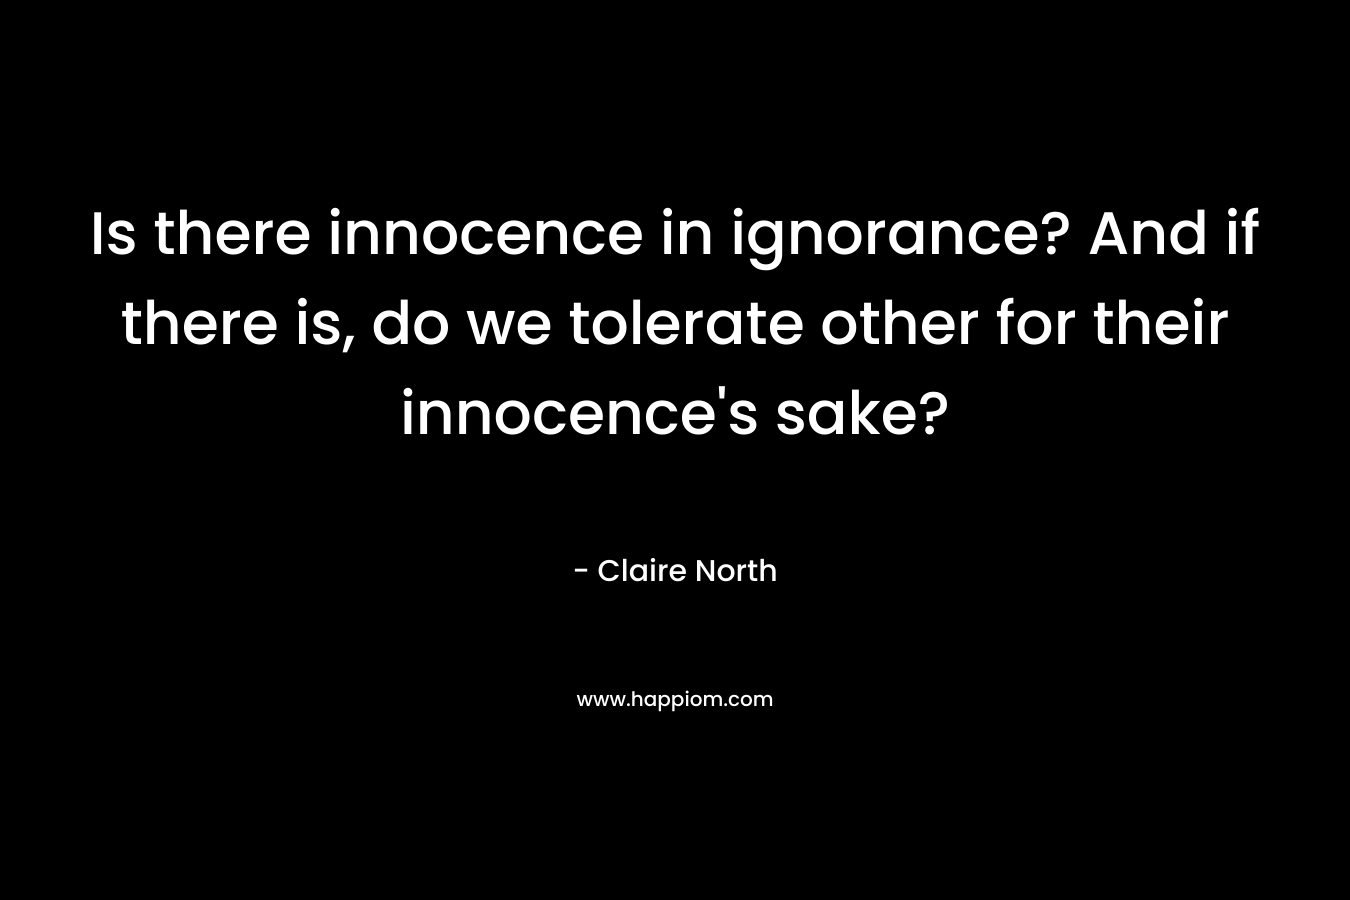 Is there innocence in ignorance? And if there is, do we tolerate other for their innocence's sake?